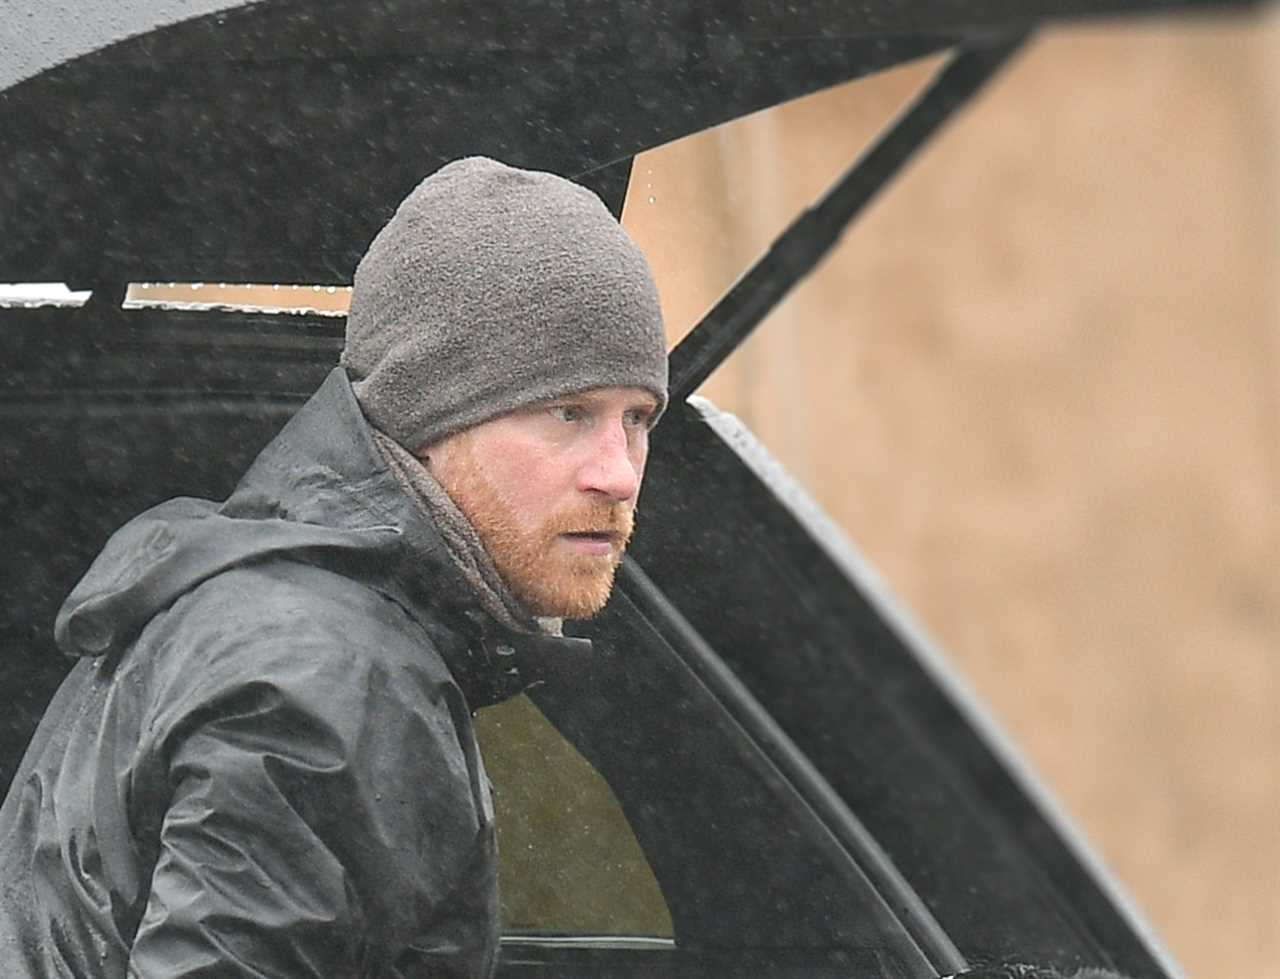 Prince Harry seen on dog walk as he breaks cover for first time after unleashing explosive claims William attacked him